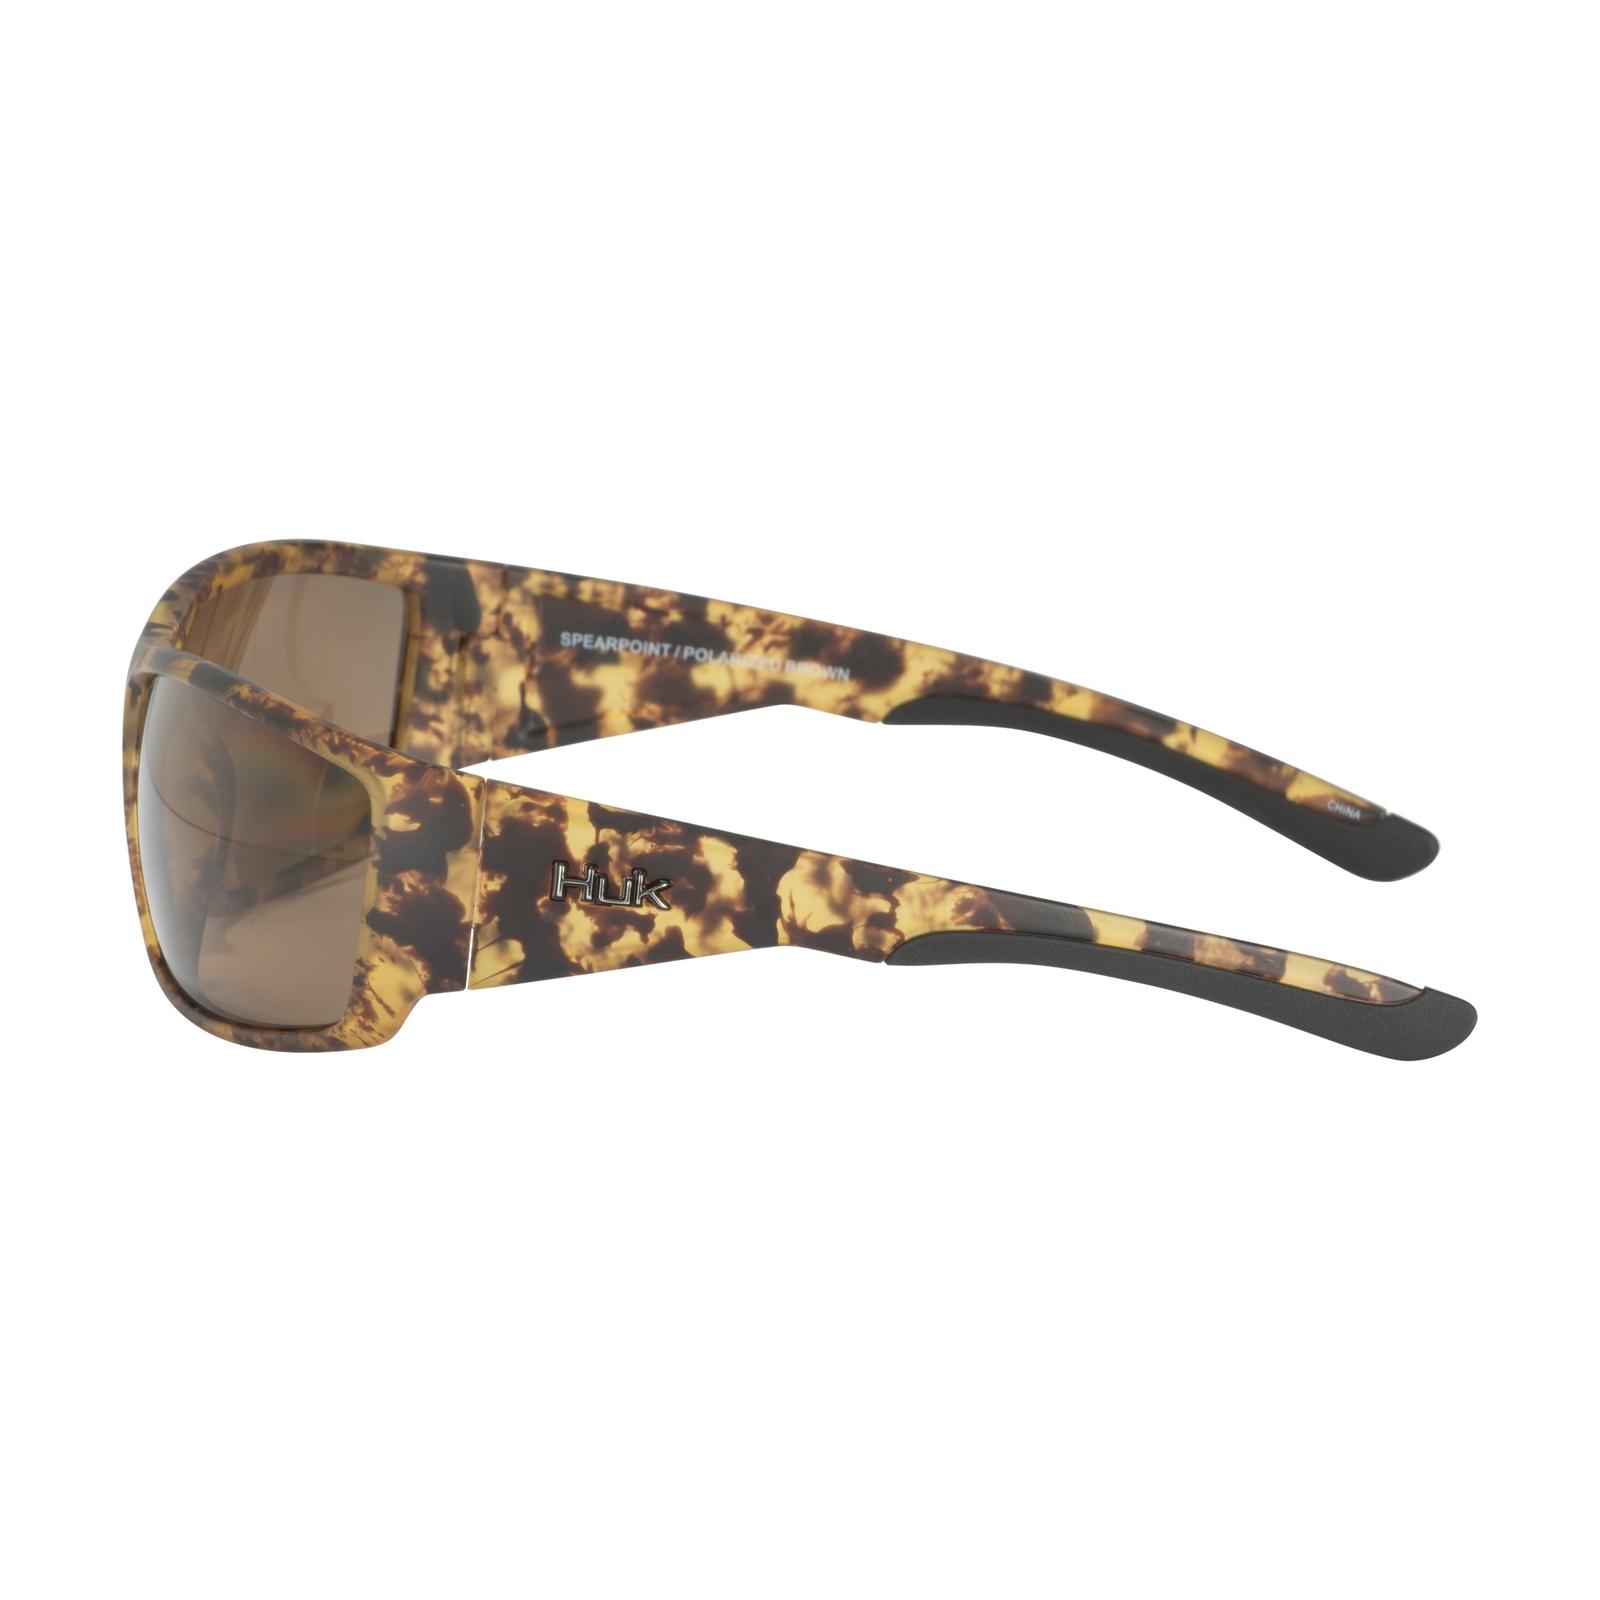 Huk Spearpoint Brown Tort/Brown Lens 125 SIDE VIEW